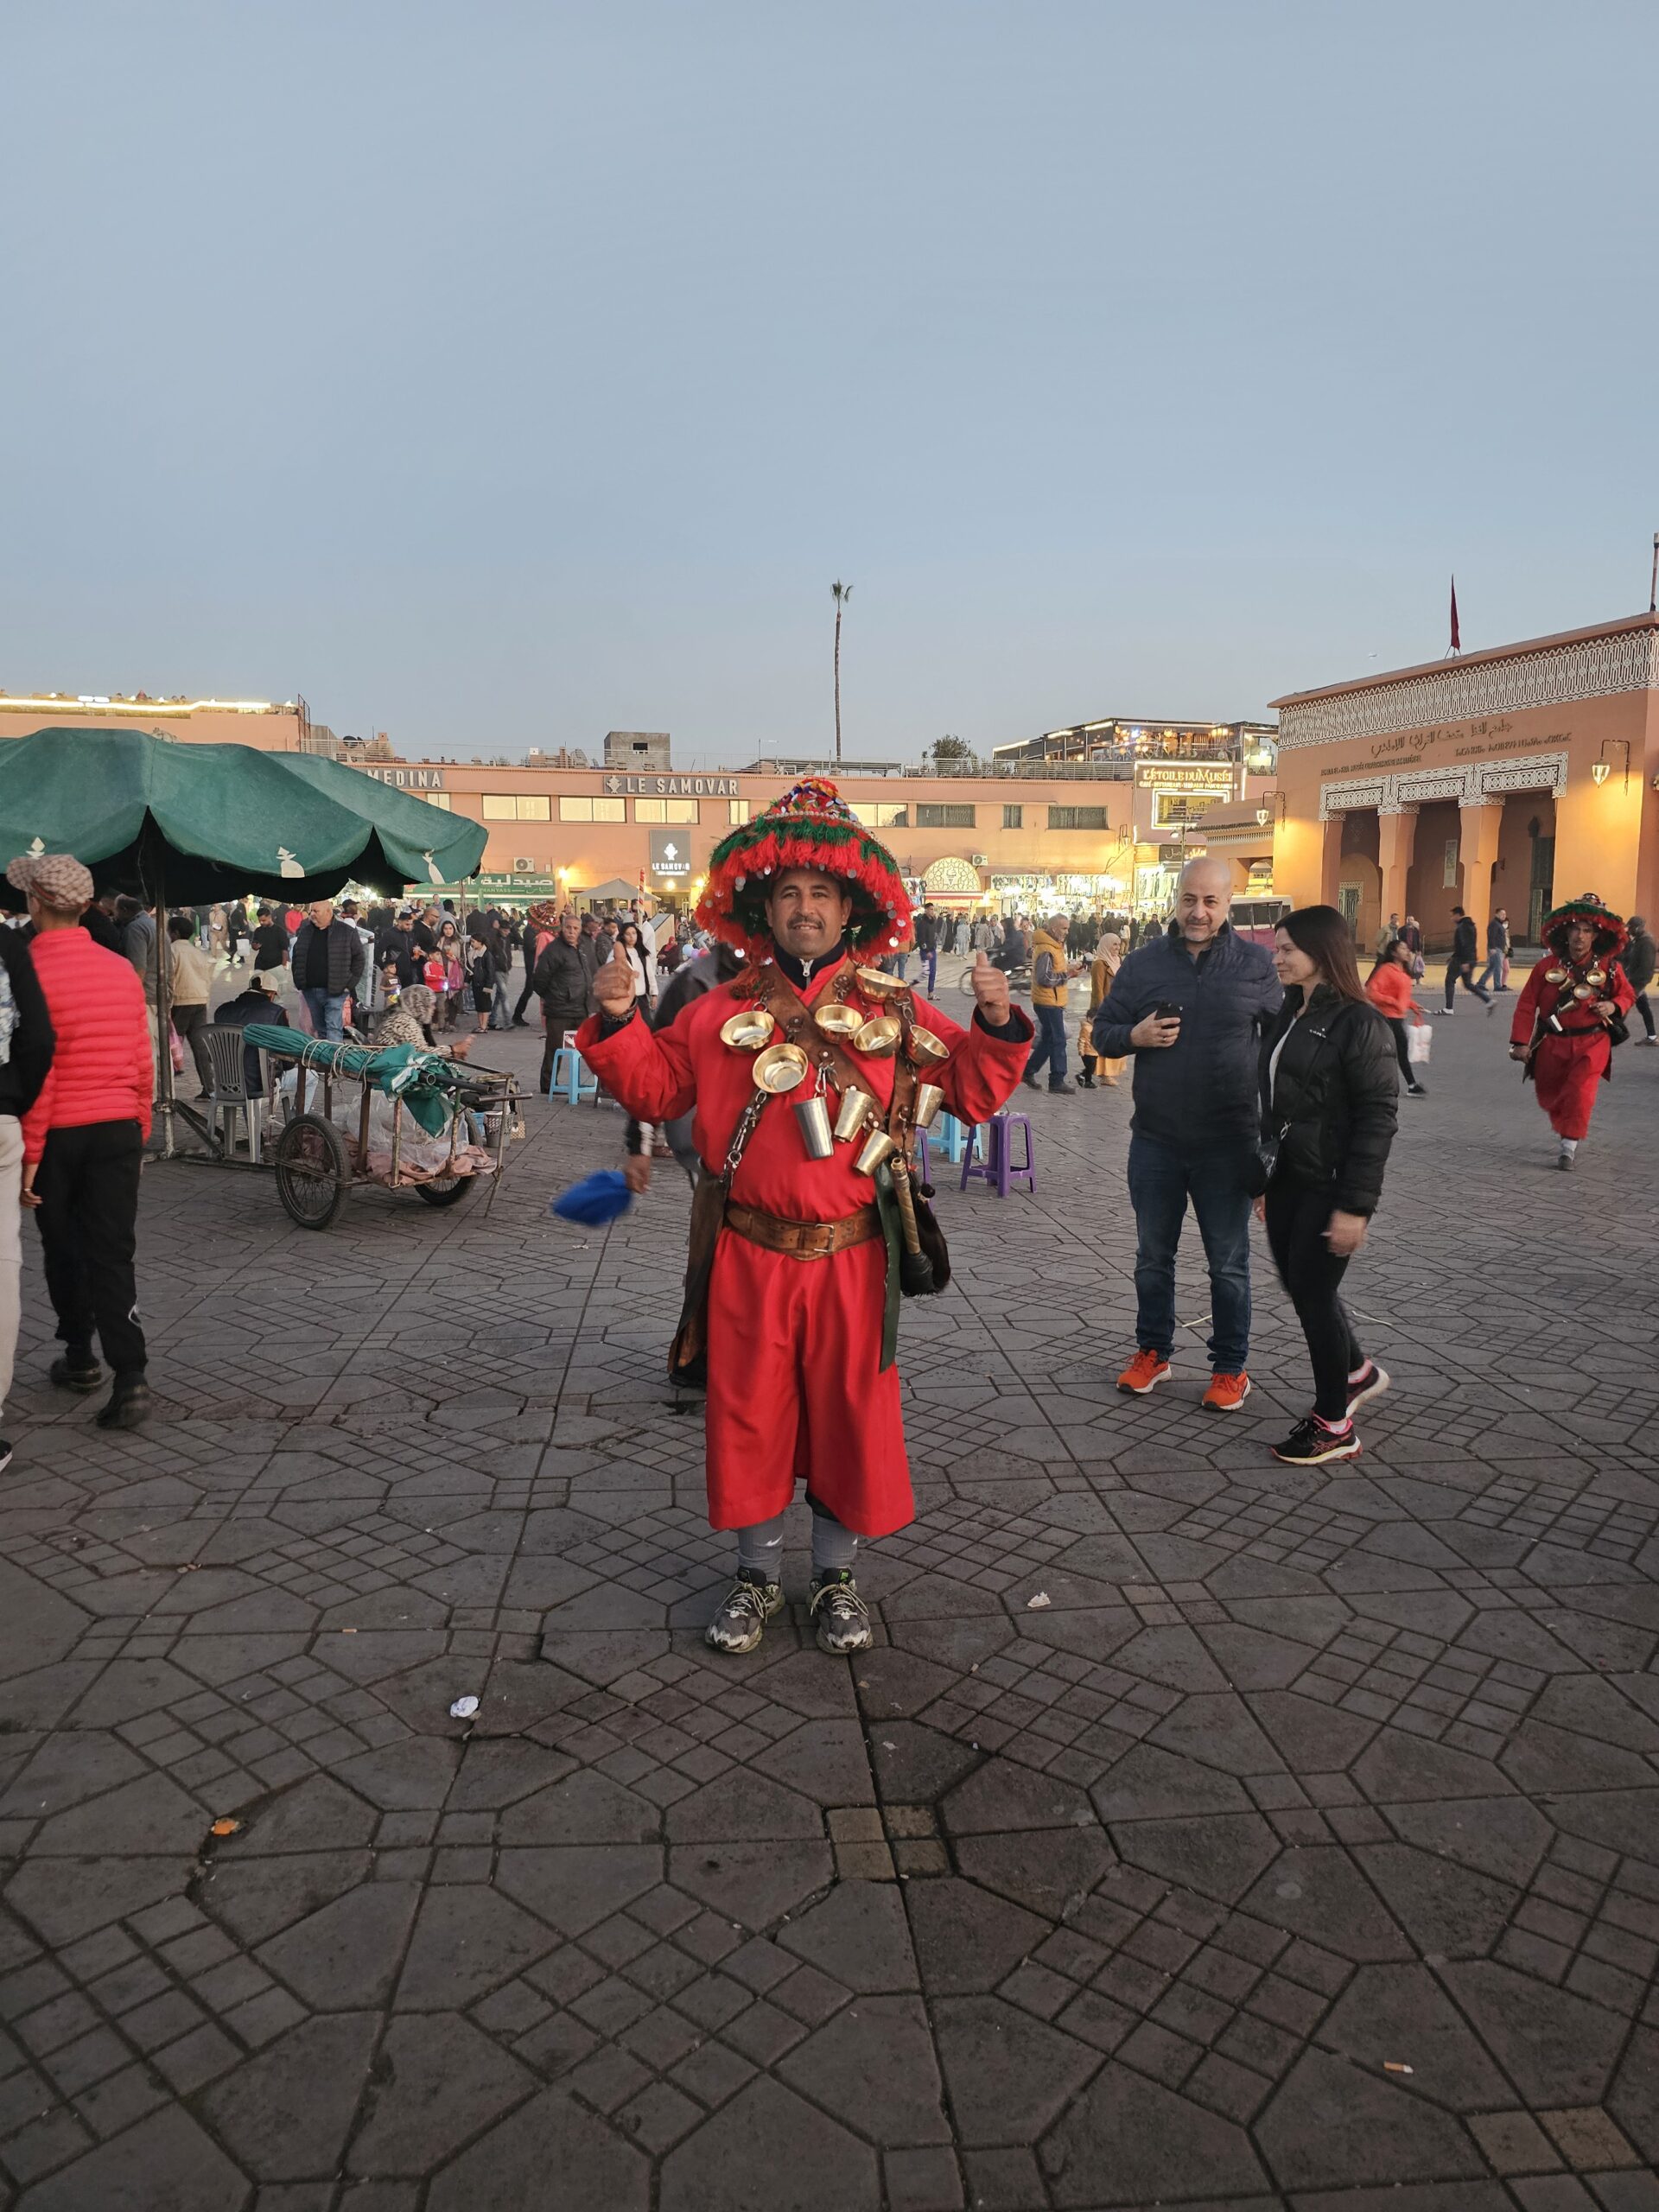 Traditional water seller or "Gharrib," in Jemaa El Fnaa, Marrakesh. He is wearing bright red clothes and hat and has brass water utensils hung around him. Image by 360onhistory.com